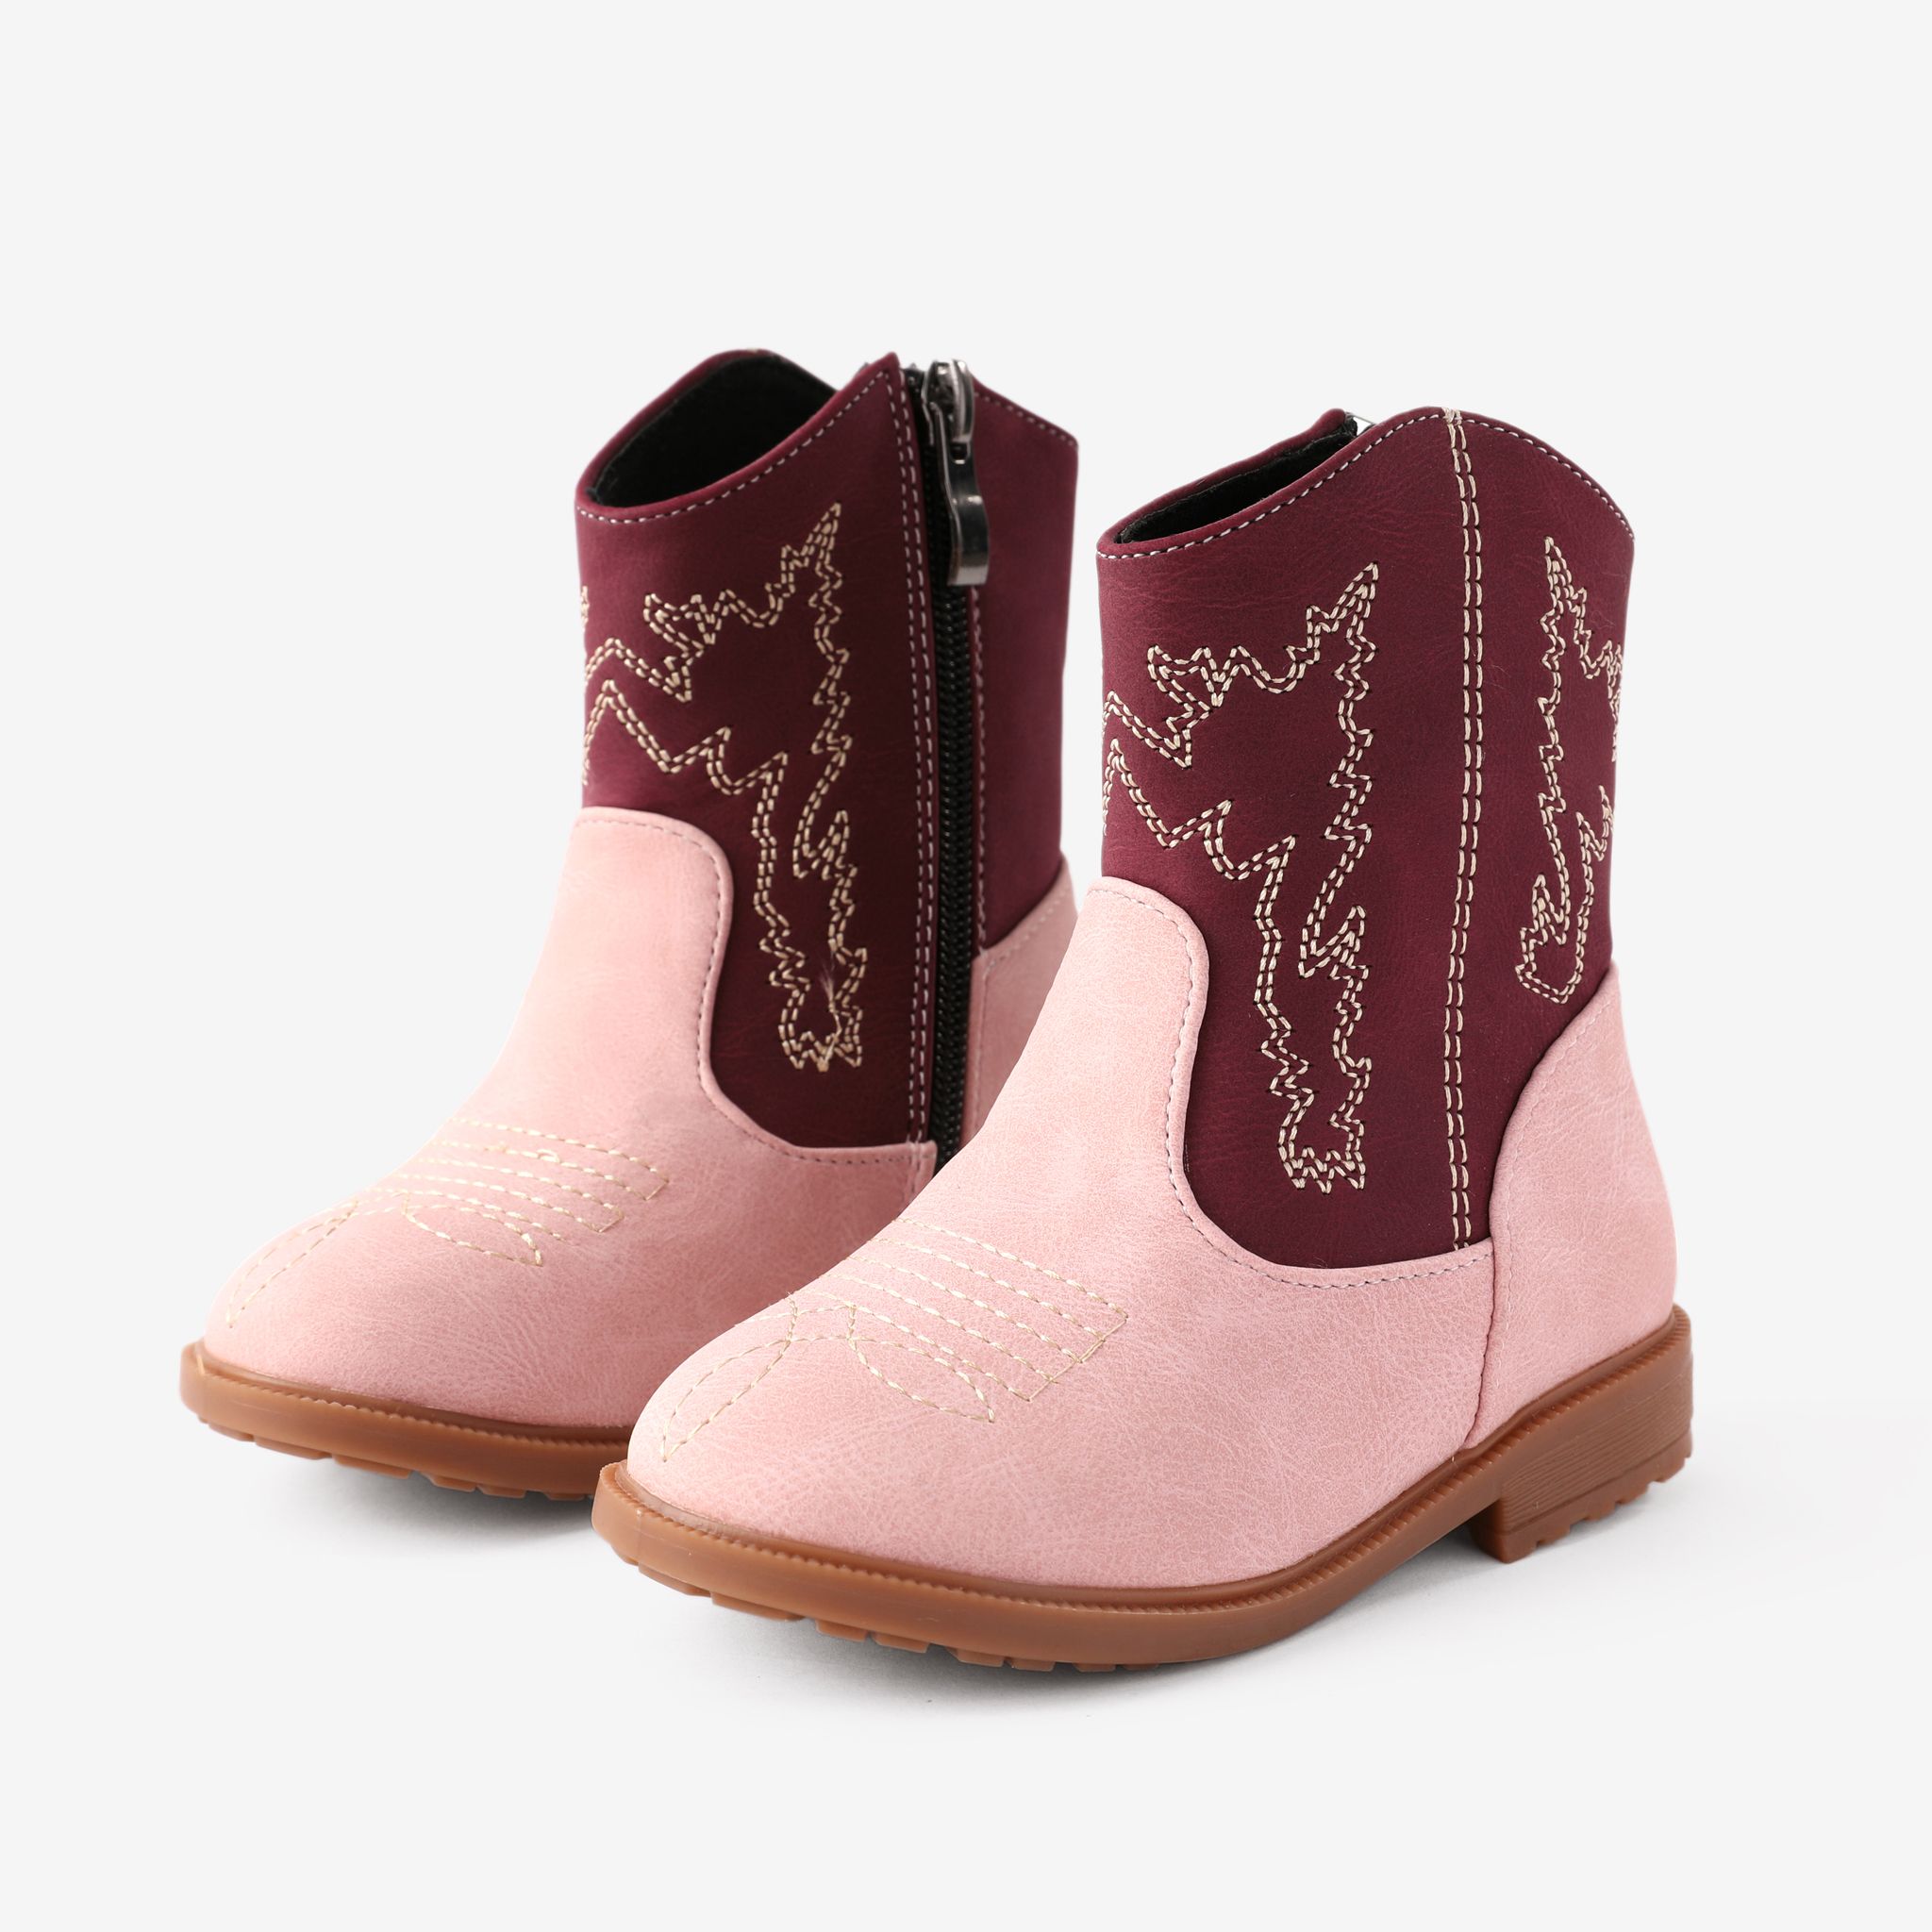 Toddler & Kids Pretty Embroidered Cowgirl Boots